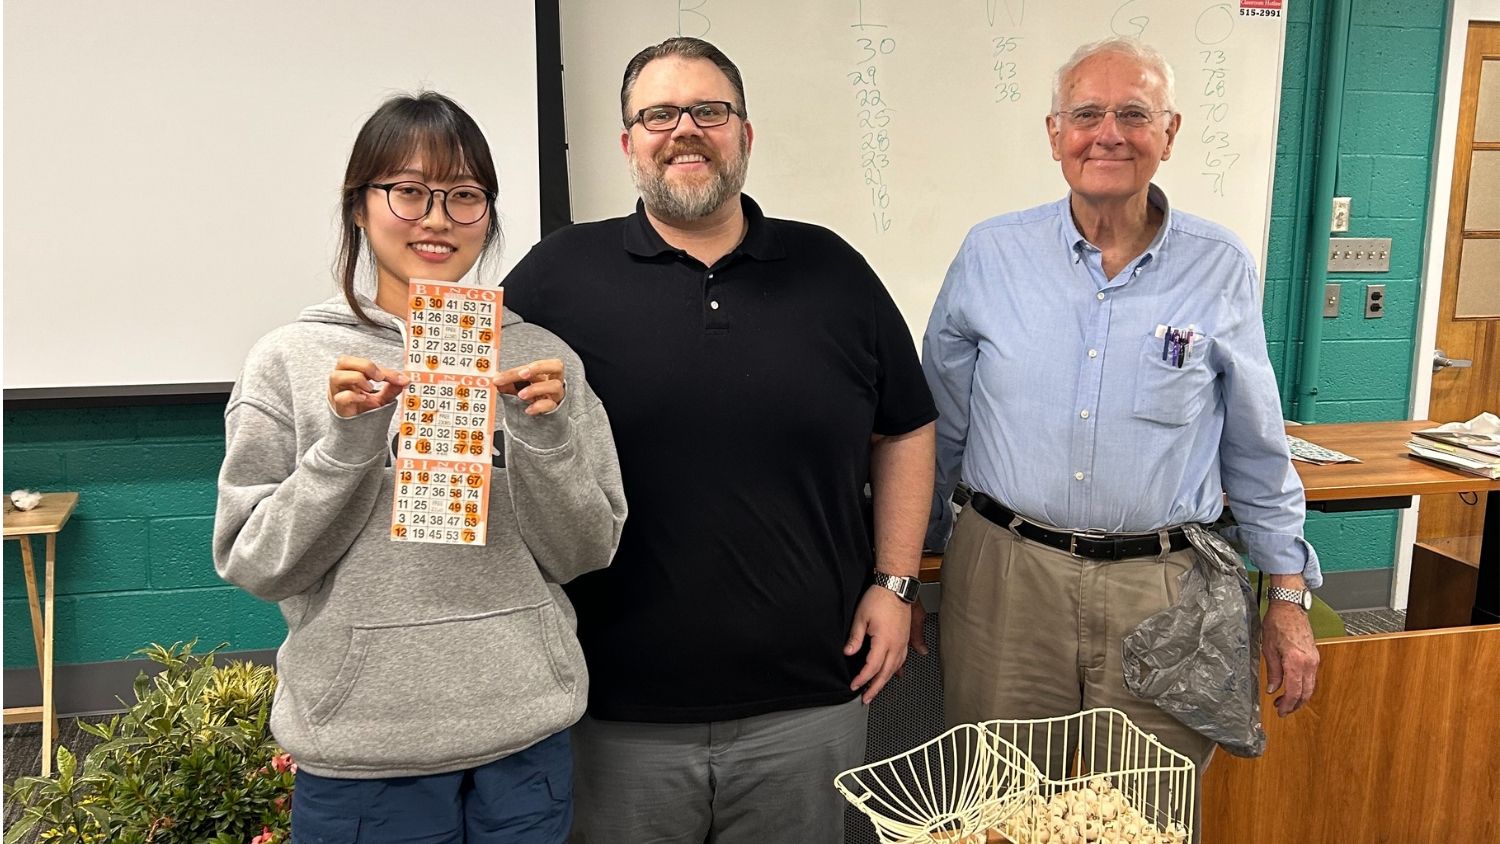 NC State CALS graduate student Seongmin Park poses with a winning bingo card.